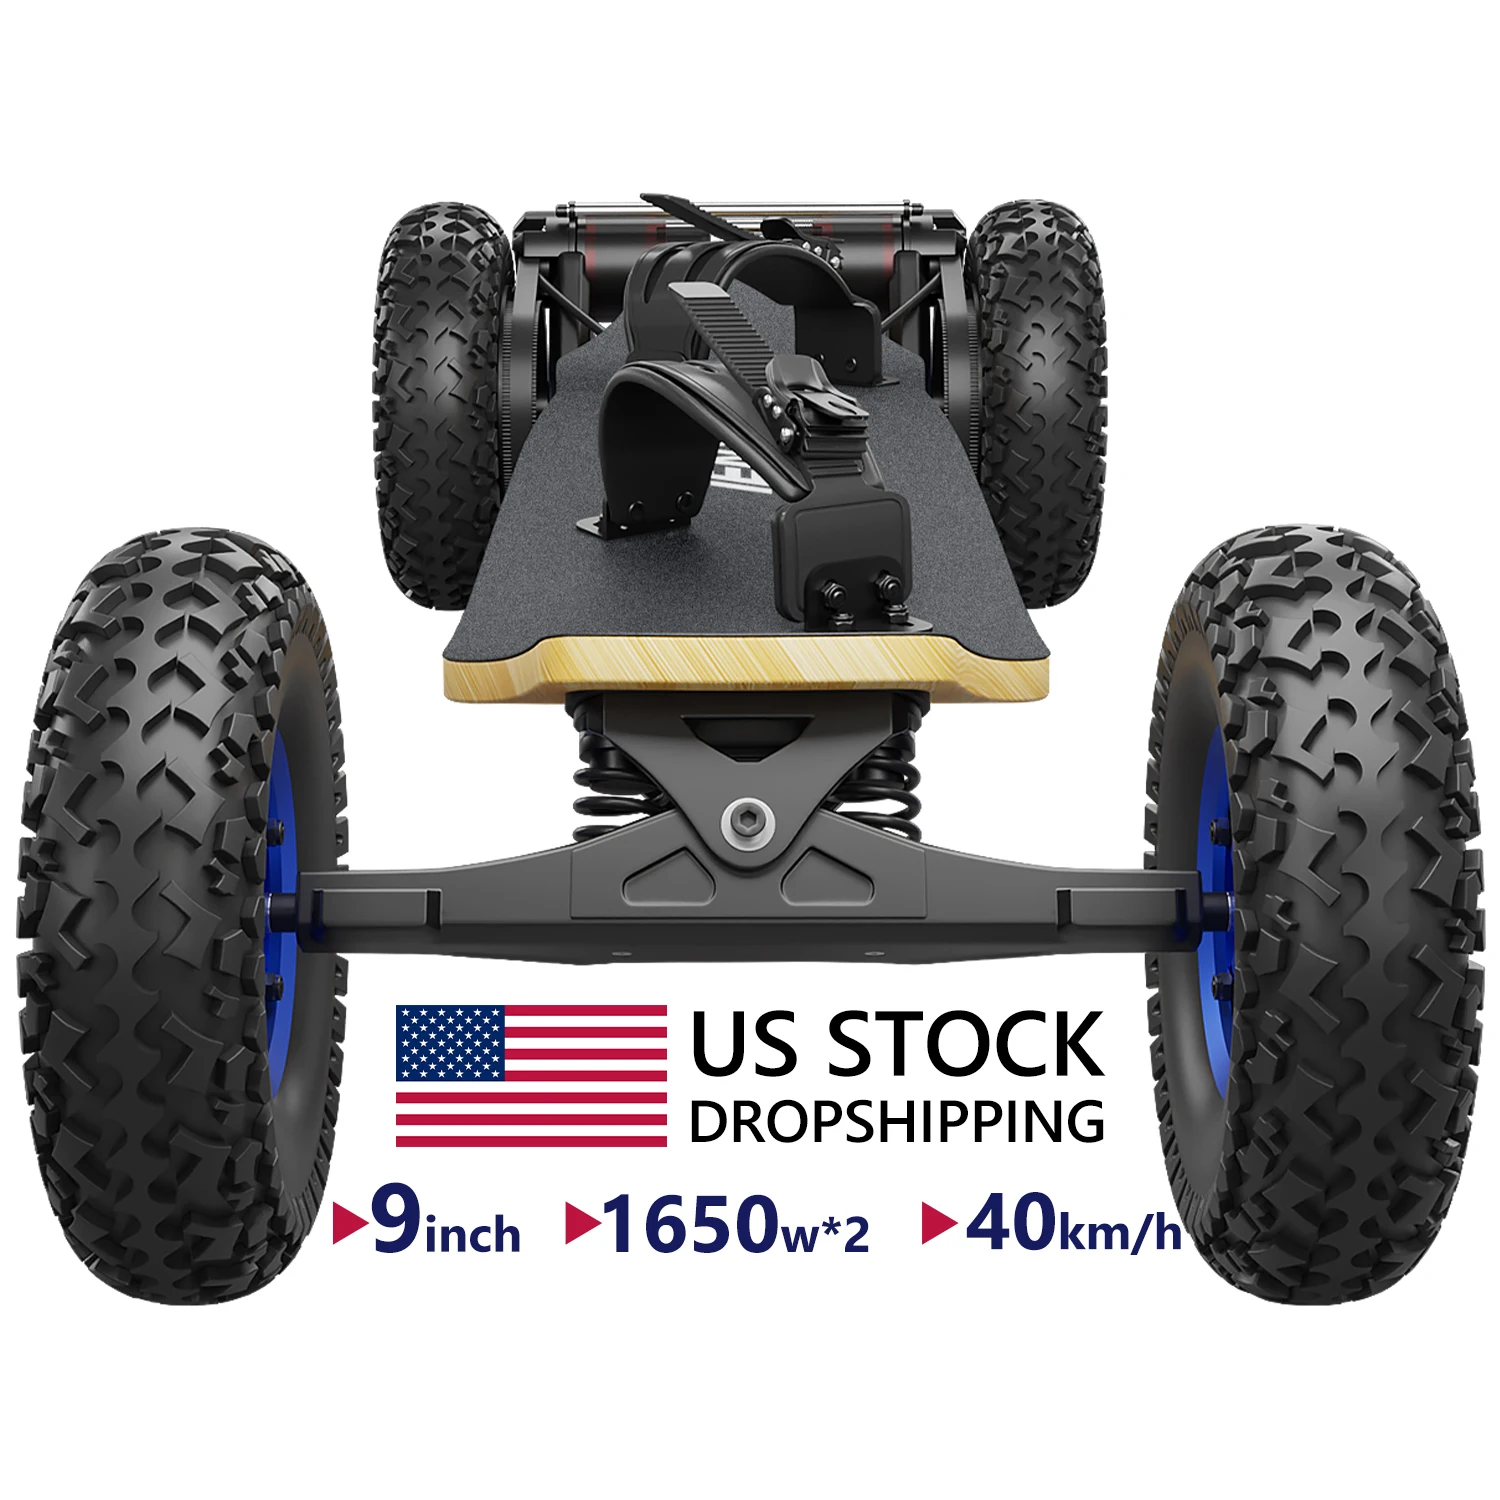 

Terrain off Road Electric Skateboard belt driver Dual Motor Each 1650W*2 Remote Control Max Load 180kg with USA warehouse